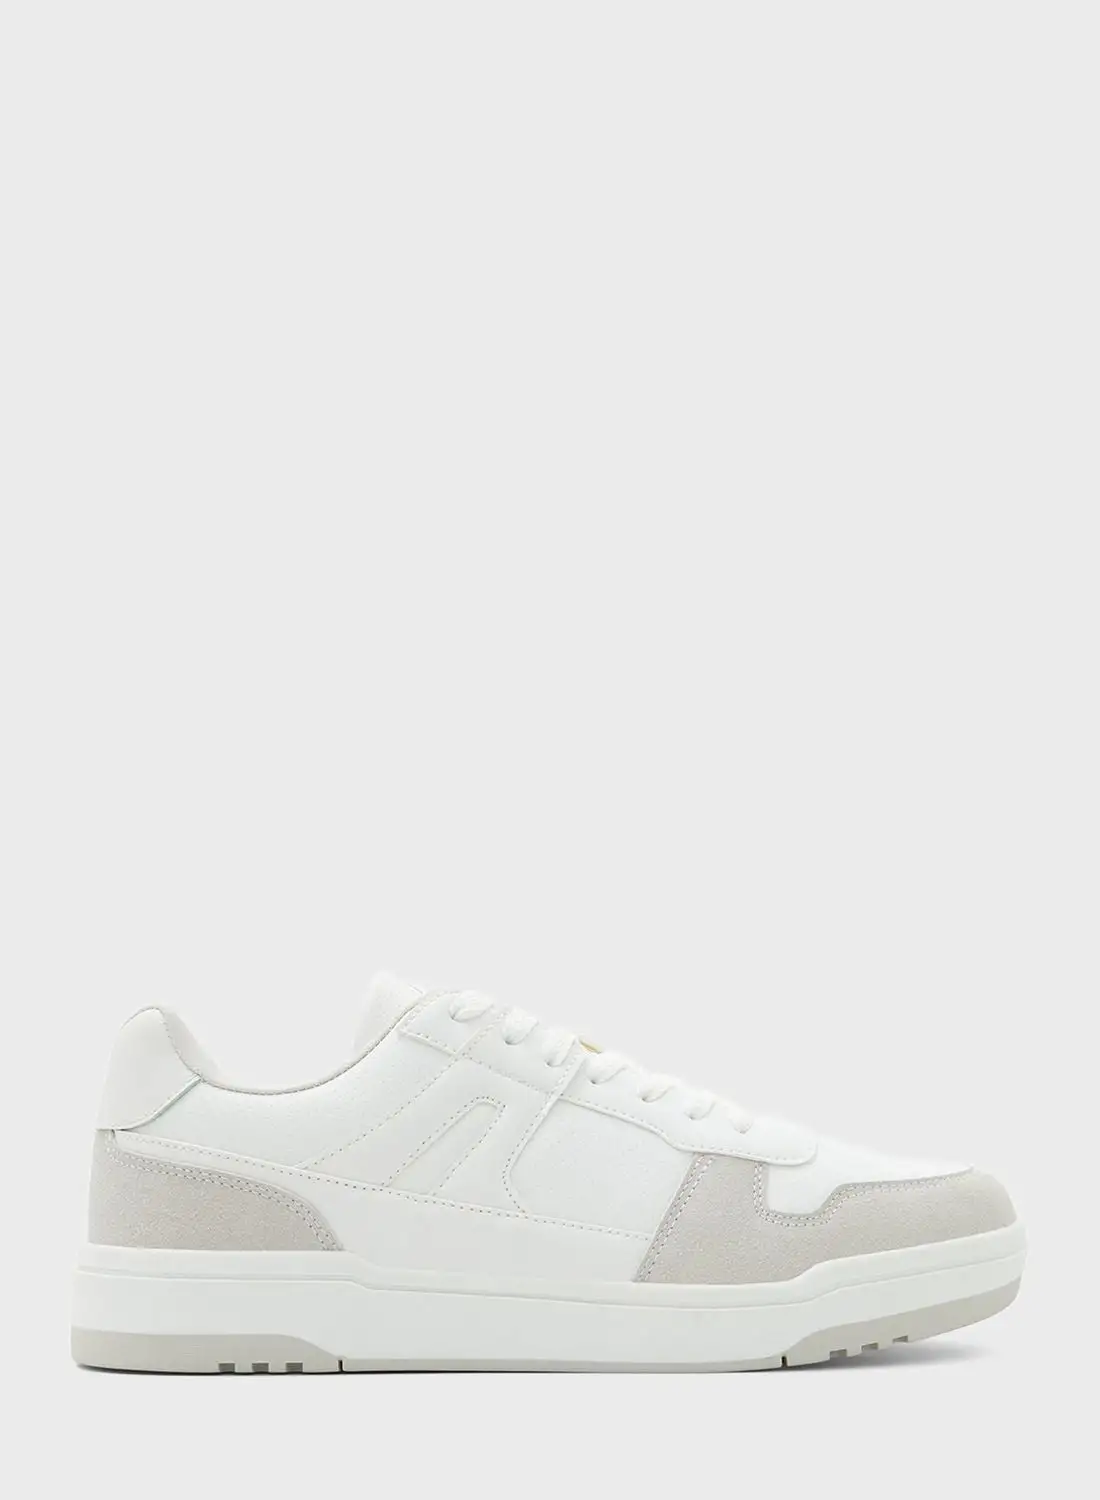 CALL IT SPRING Casual Low Top Sneakers